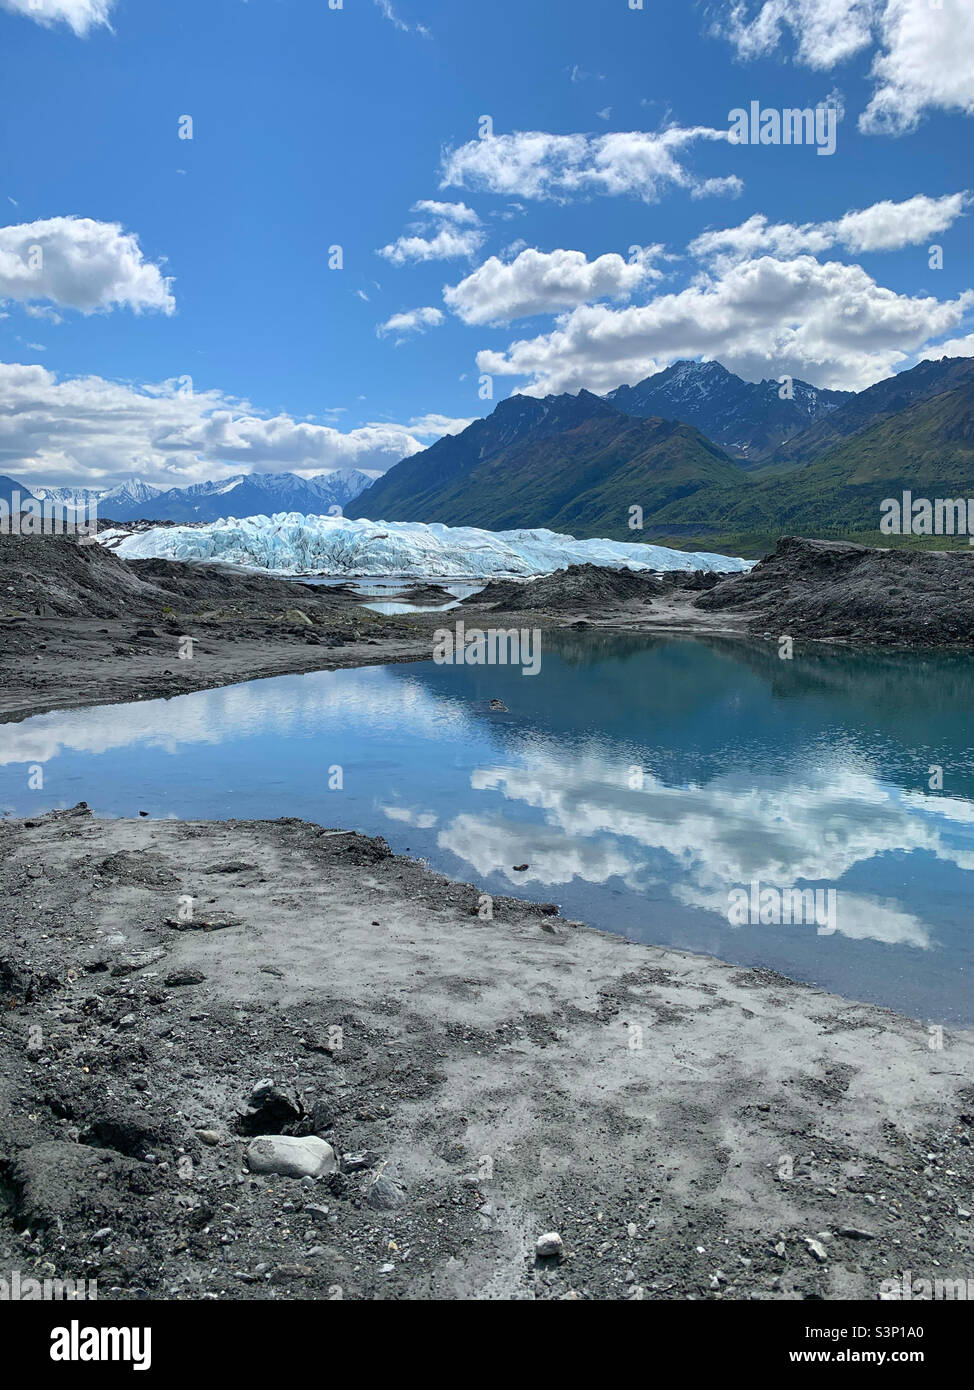 Matanuska Glacier in the summer with glacial lake and mountains of Alaska in the background. Stock Photo